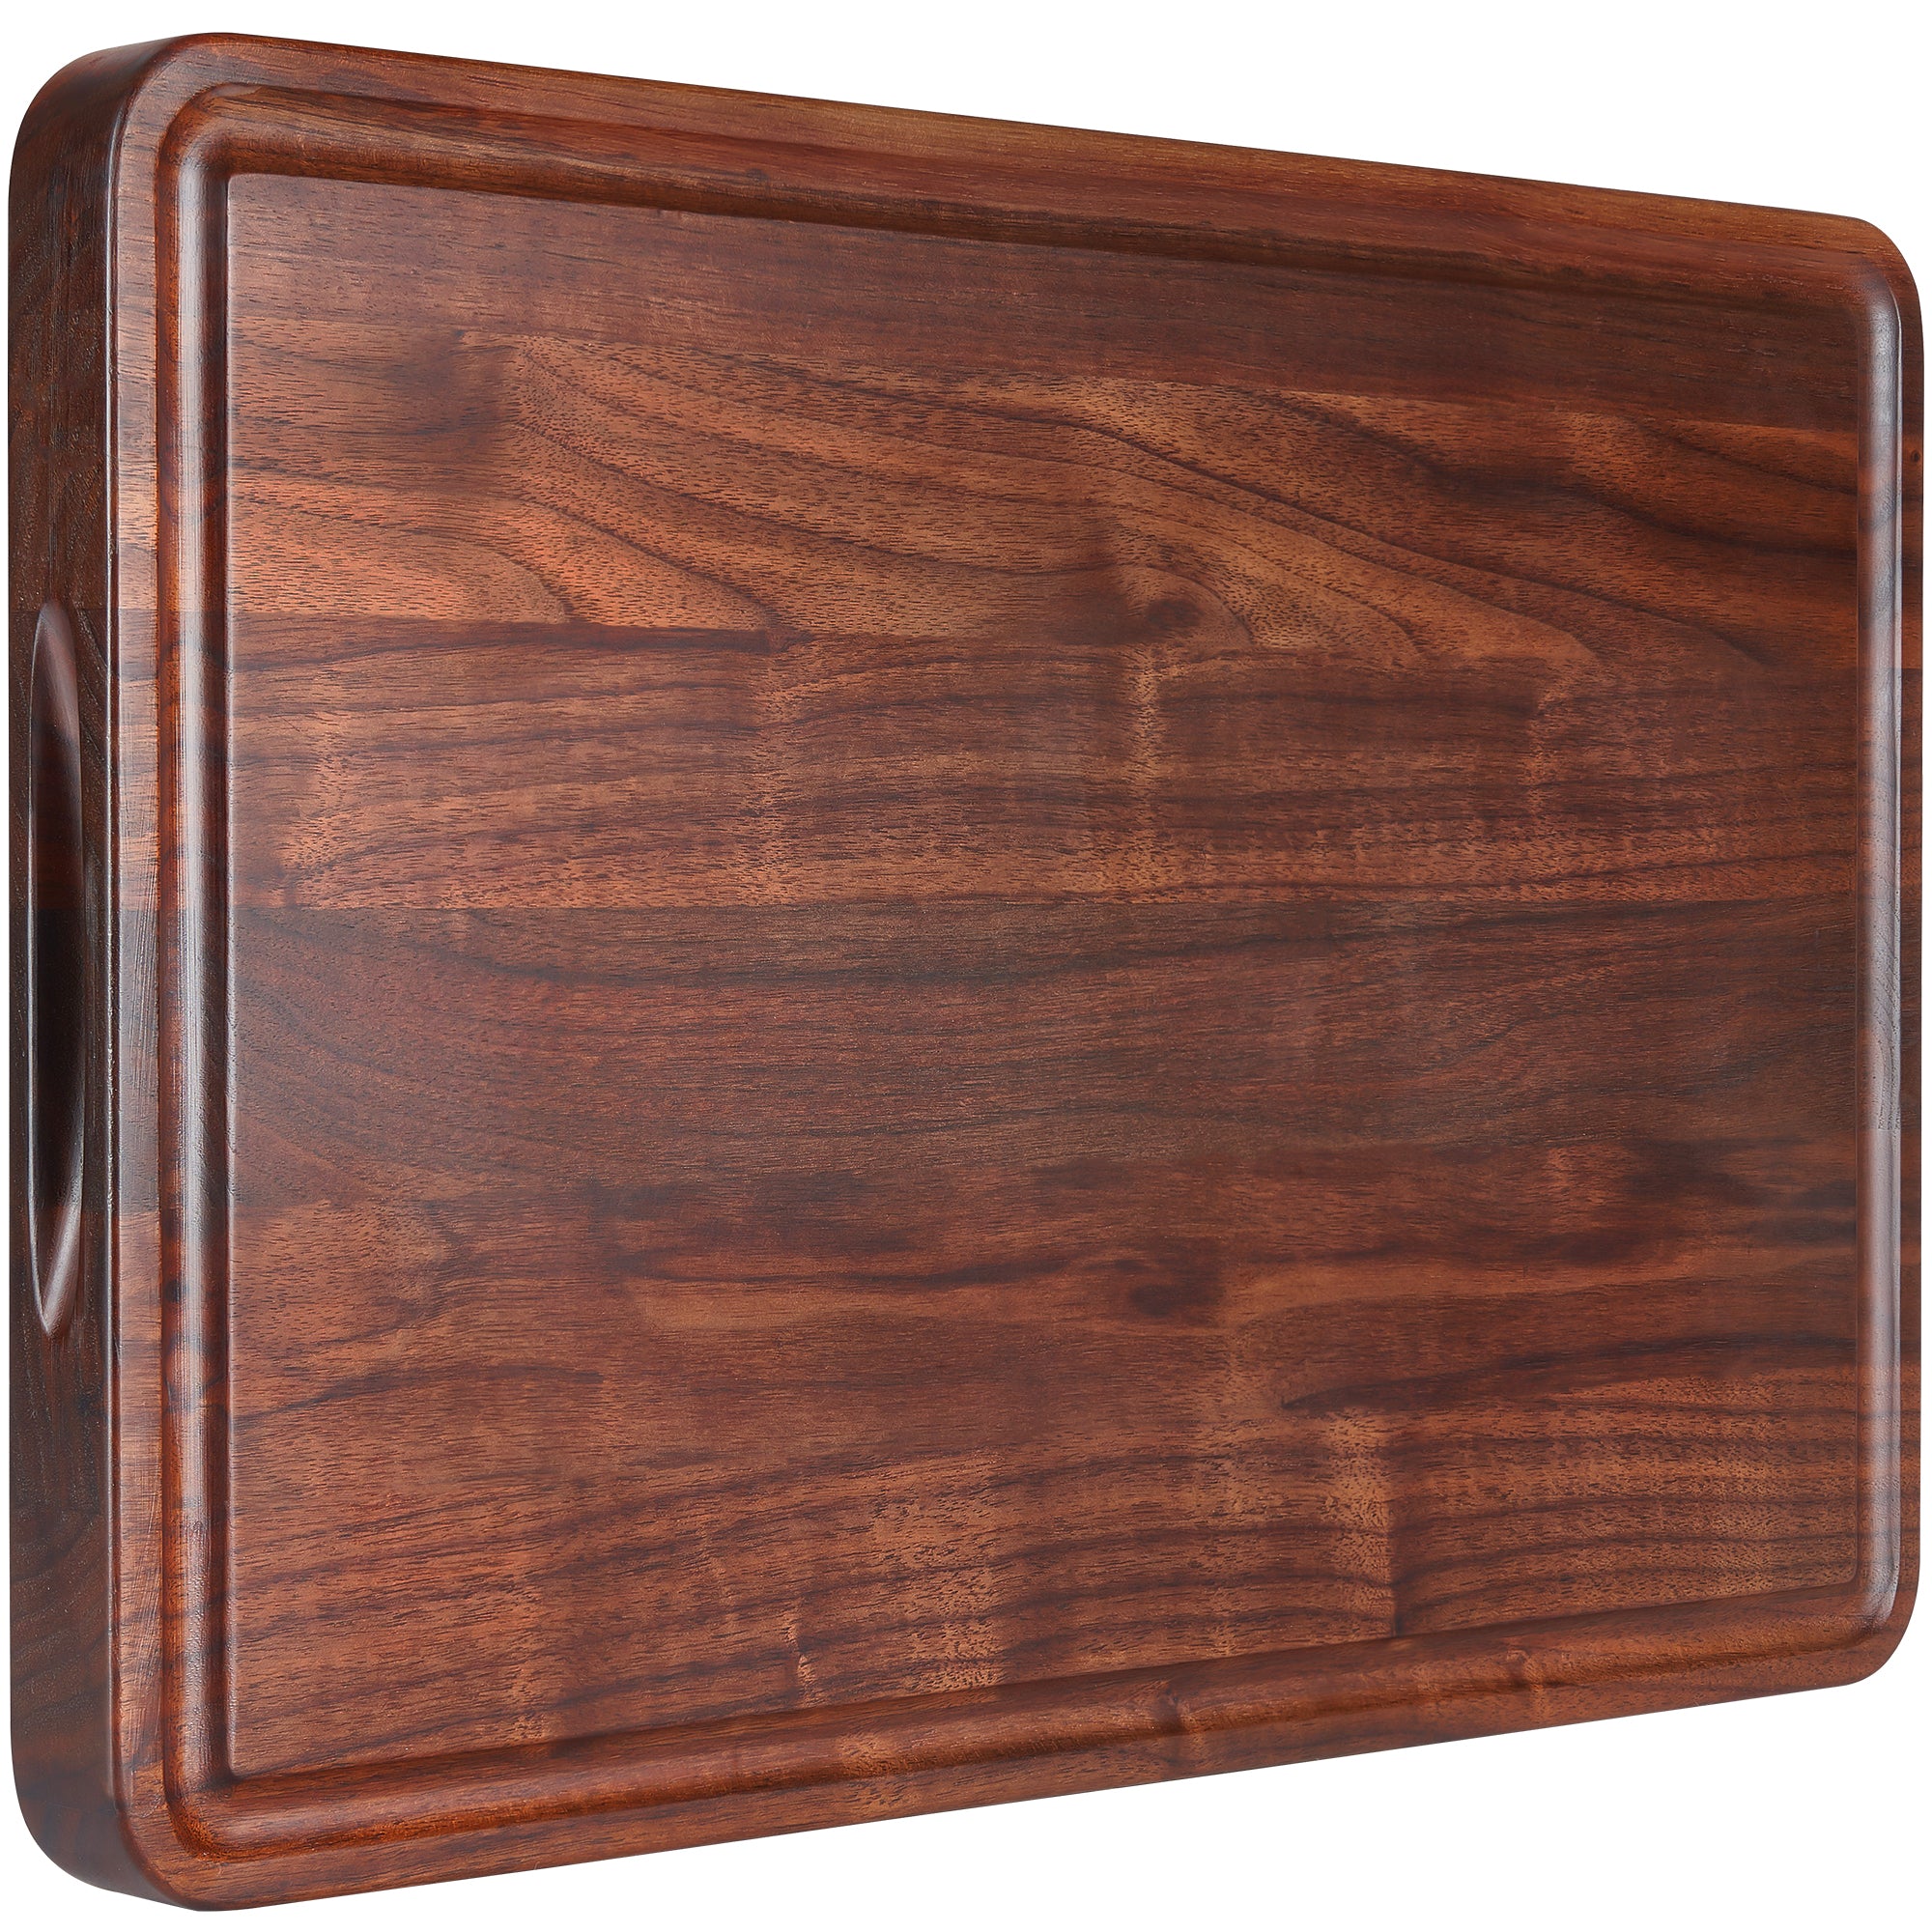 AZRHOM Extra Large Acacia Wood Cutting Board For Kitchen With